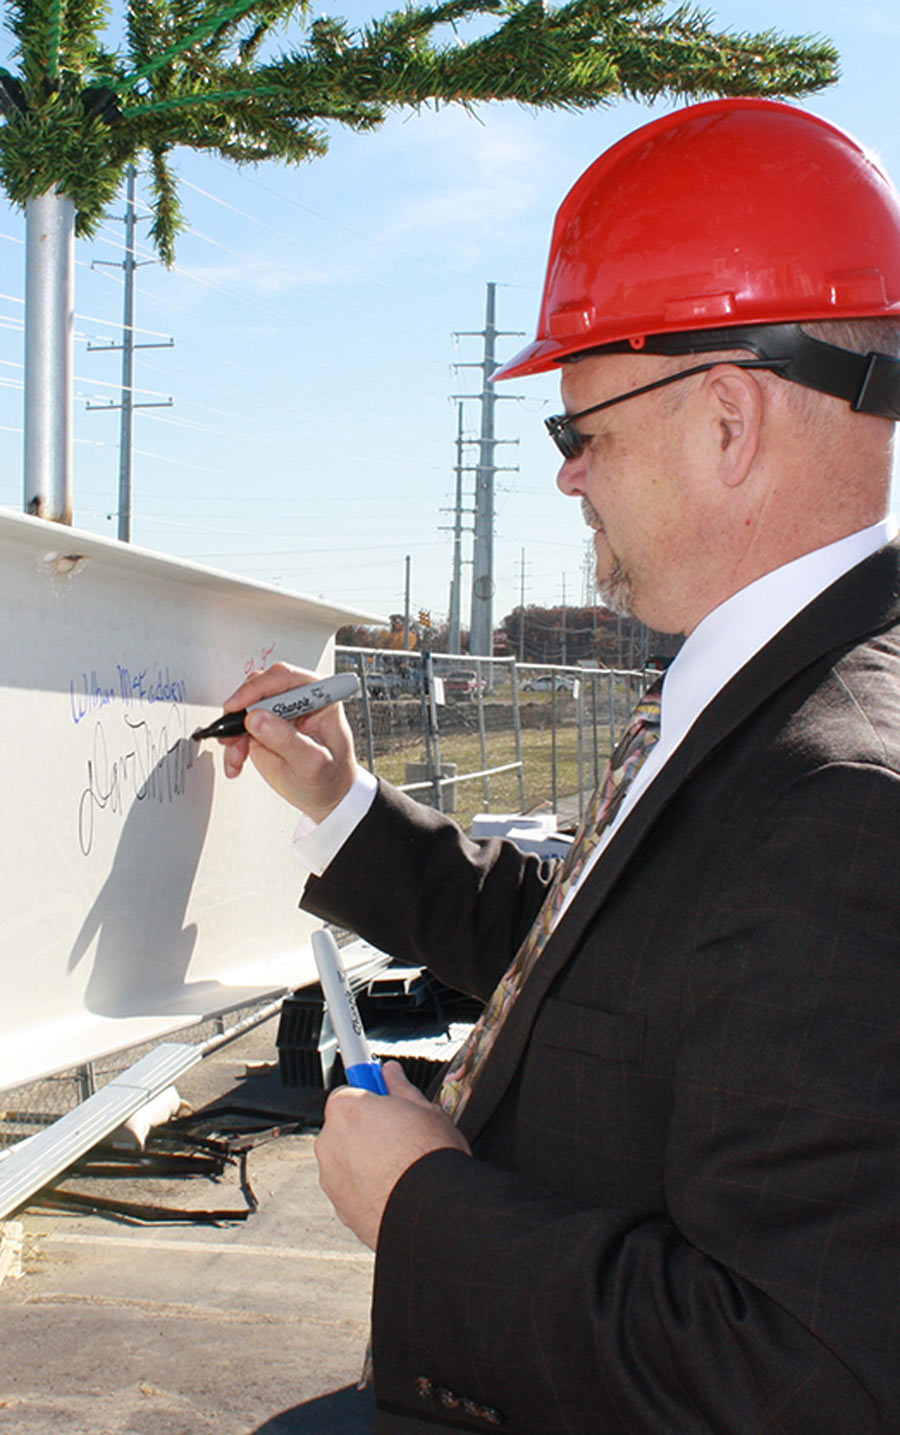 Dave McFadden in a black suit and red hard hat, signing a metal beam that is being used for construction